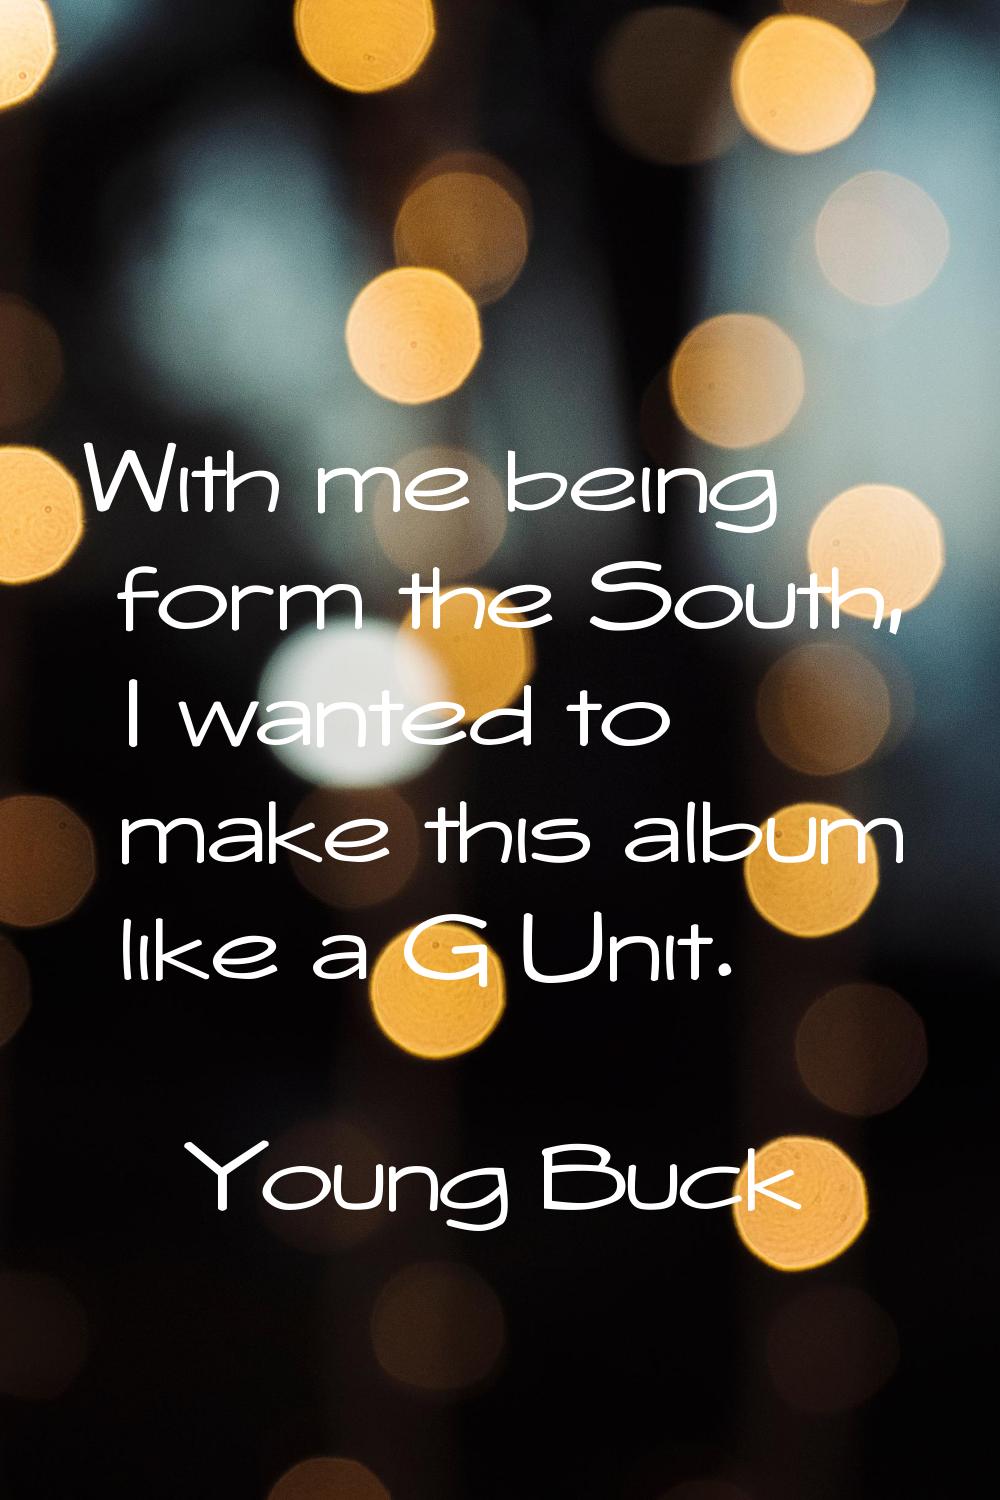 With me being form the South, I wanted to make this album like a G Unit.